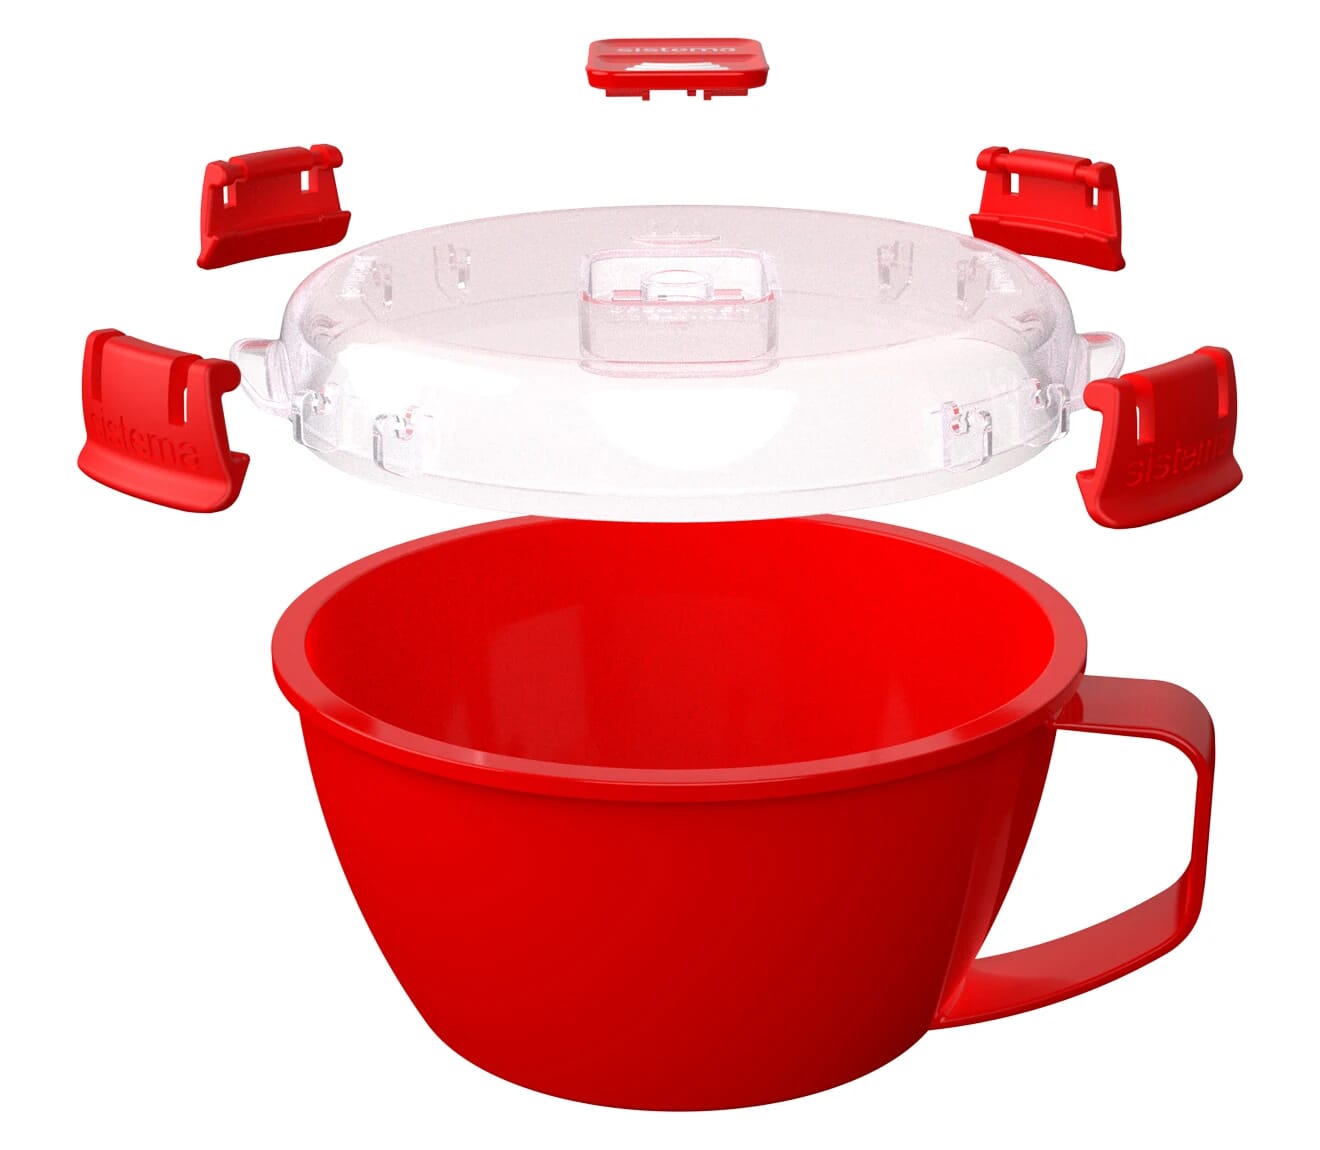 Microwaveable Noodle Bowl with Lid - GD-NB50